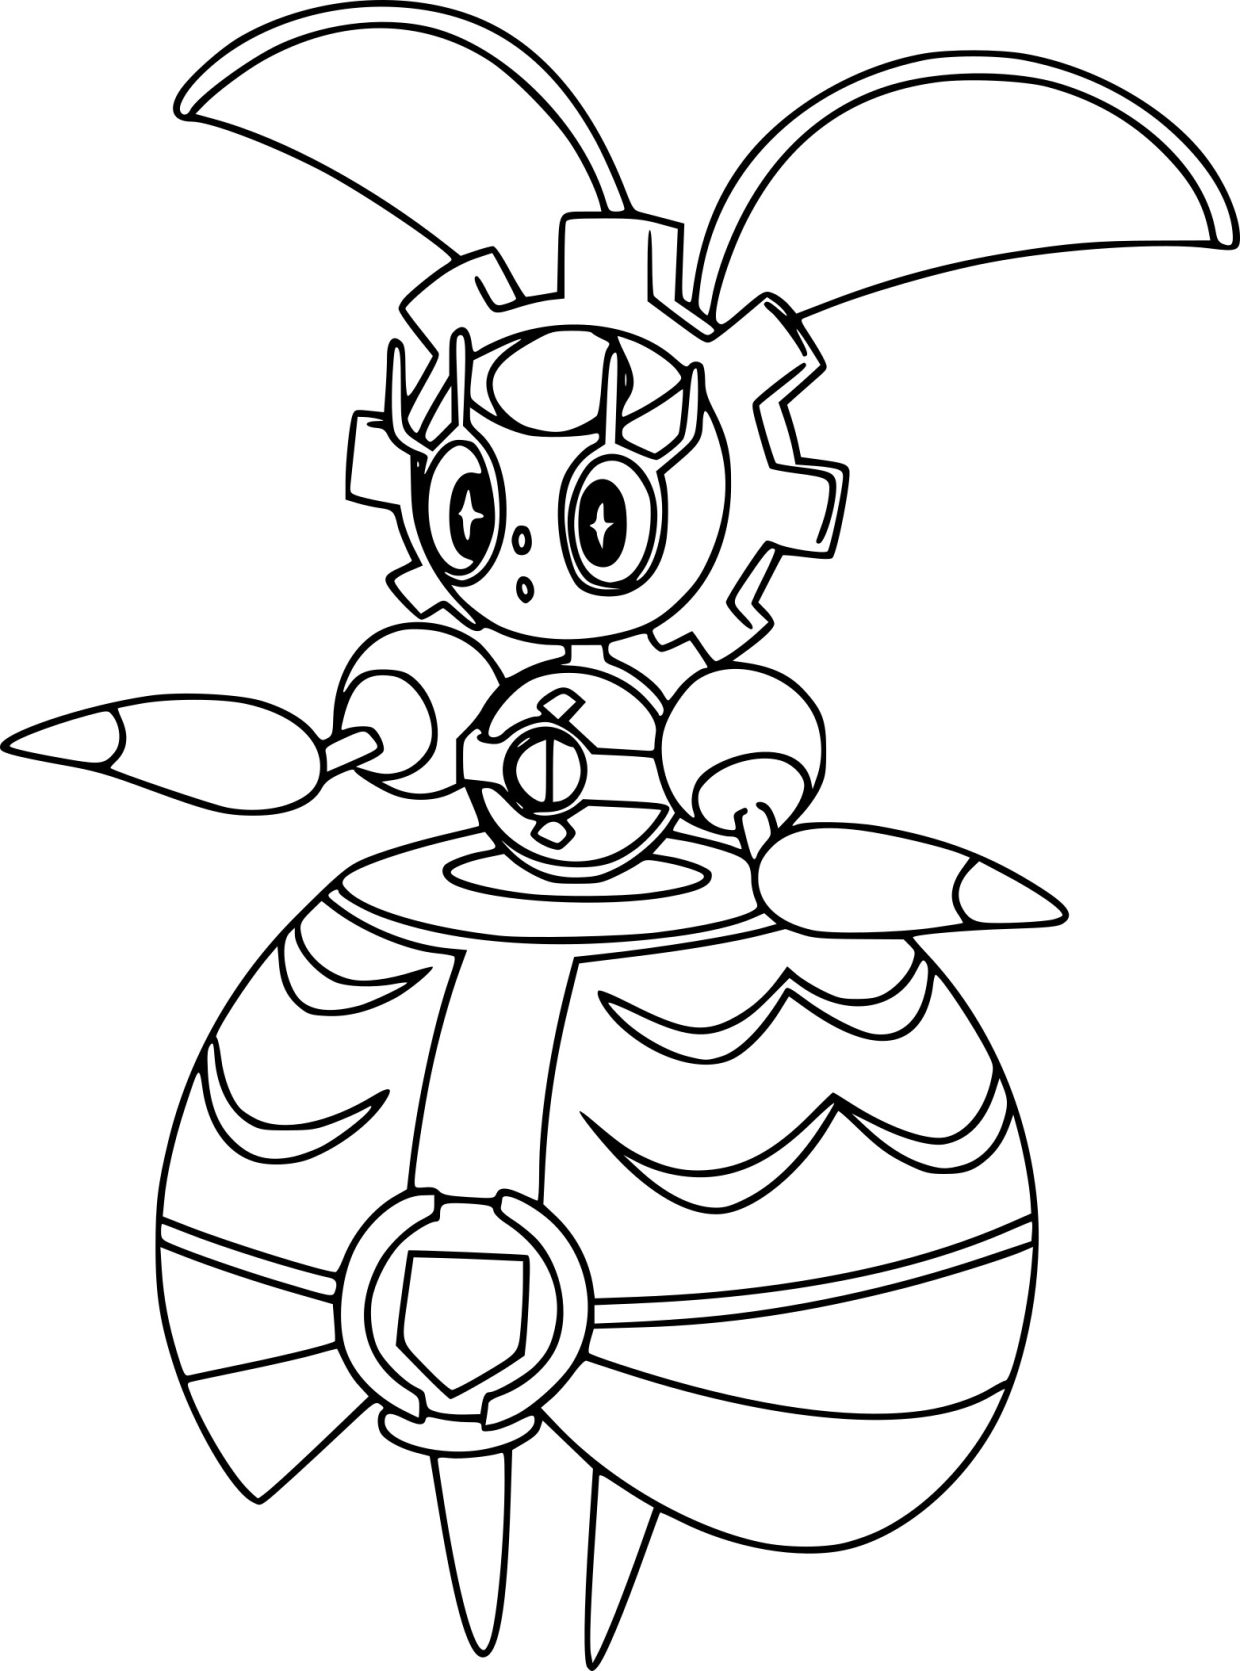 Pokemon Magearna coloring pages printable